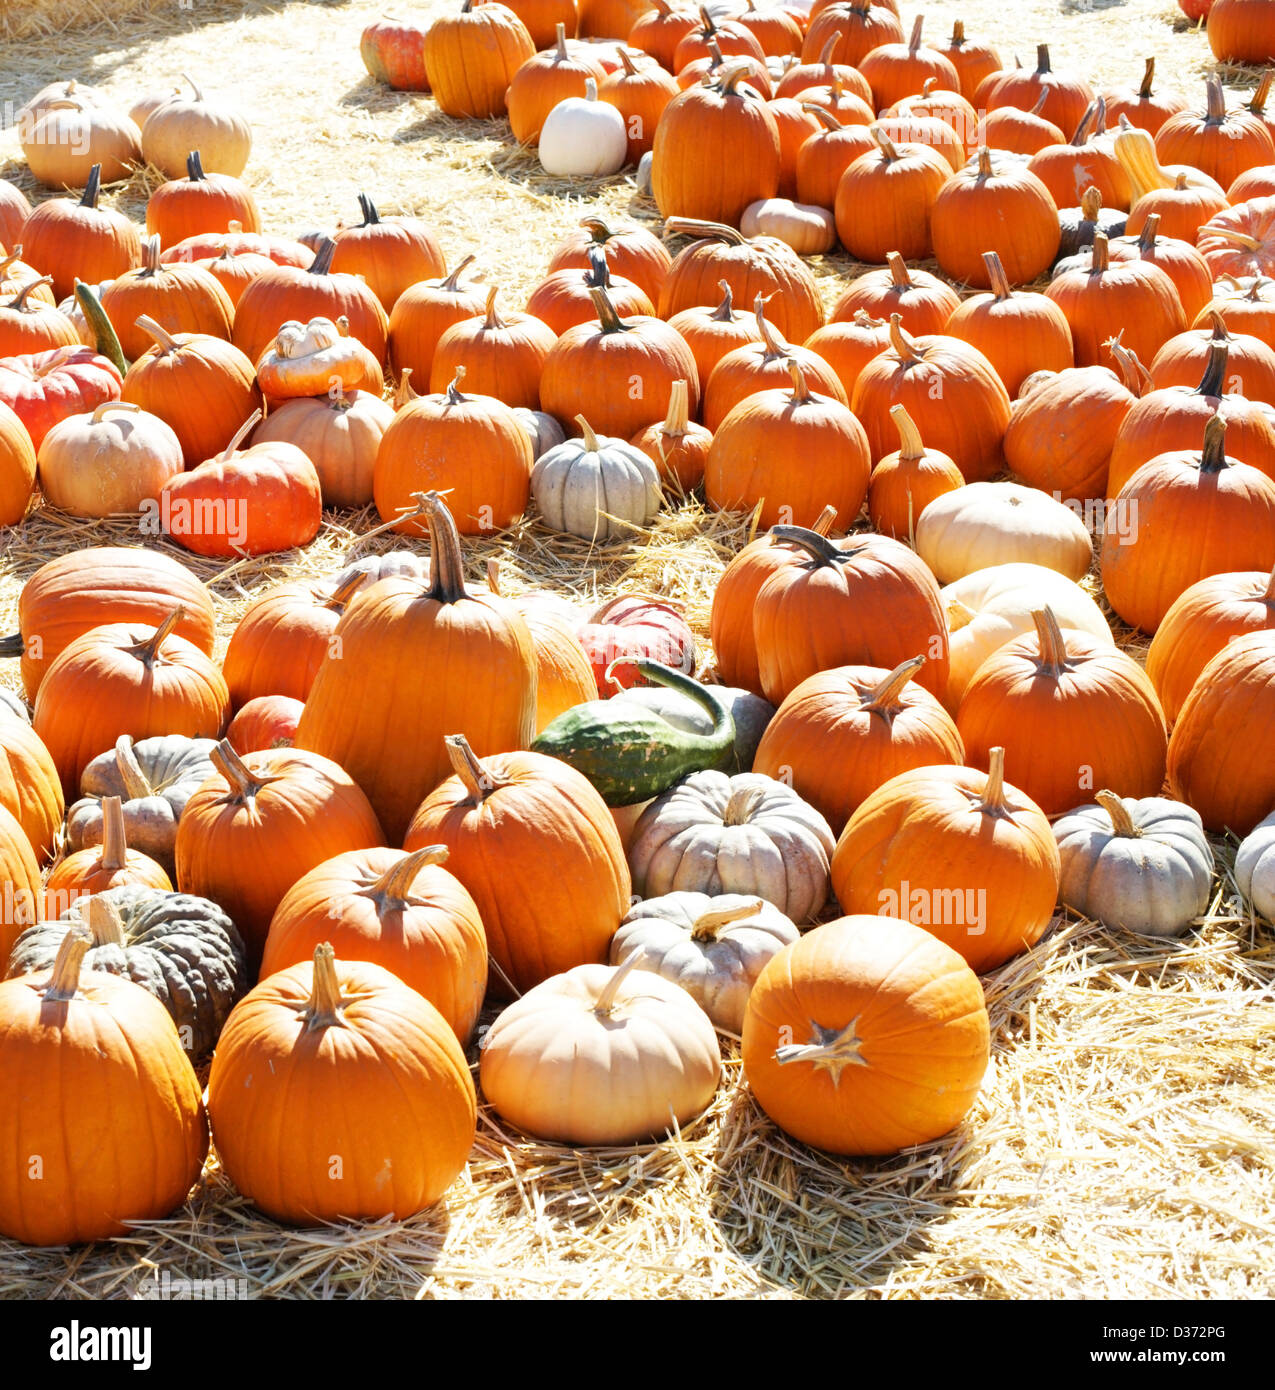 A Pumpkin Patch in october Stock Photo Alamy